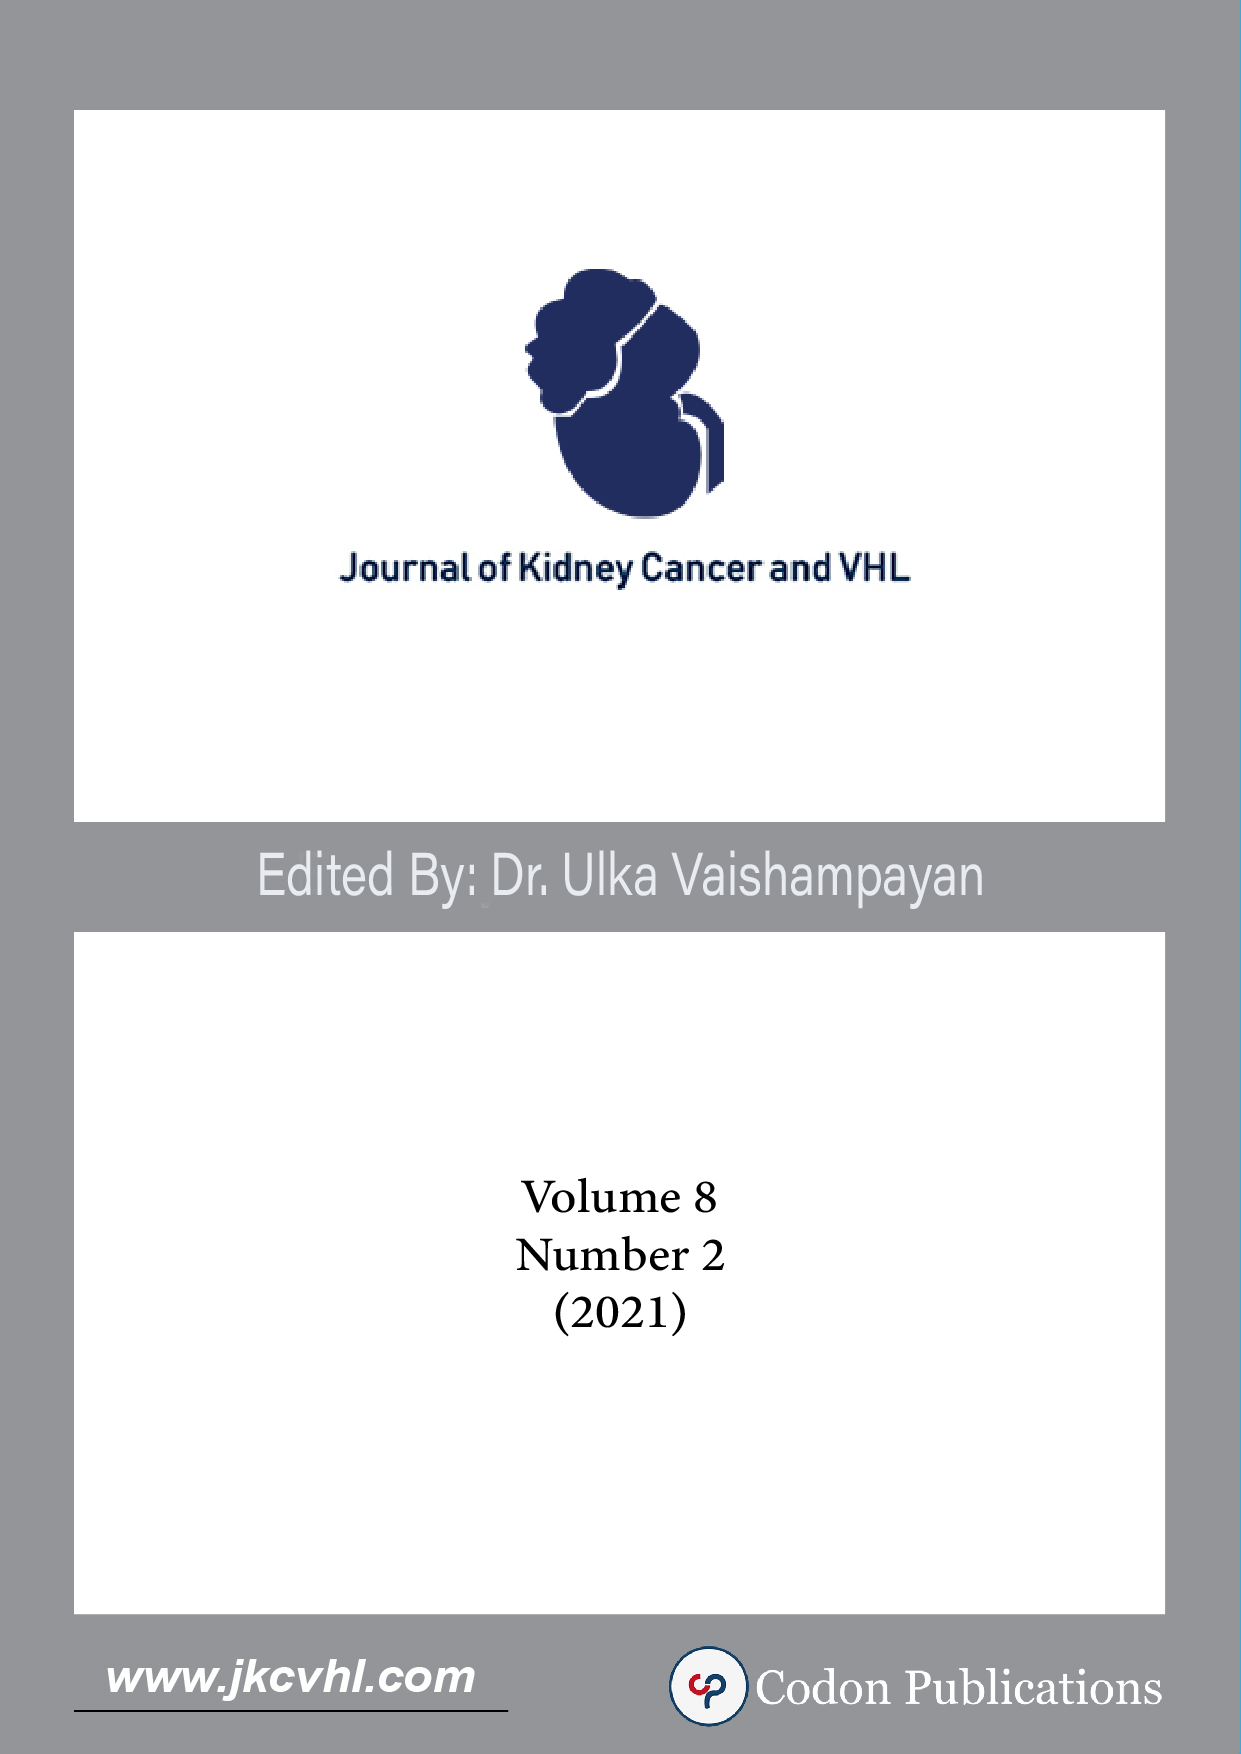 					View Vol. 8 No. 2 (2021): Journal of Kidney Cancer and VHL
				